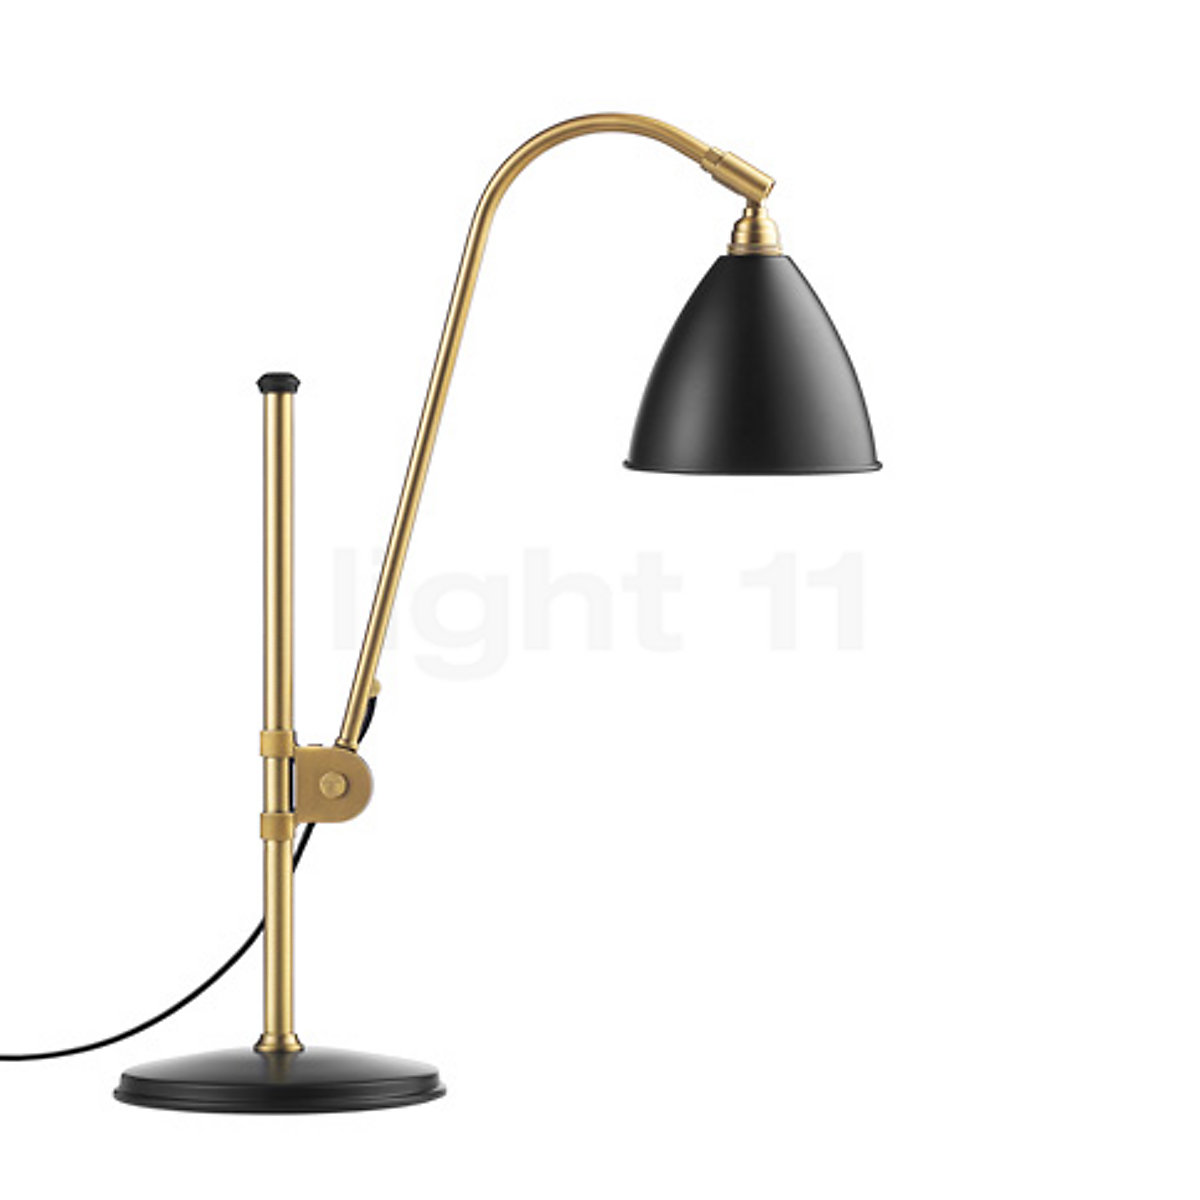 Gubi Bl1 Table Lamp Brass At Light11 Eu, Best Place To Get Table Lamps